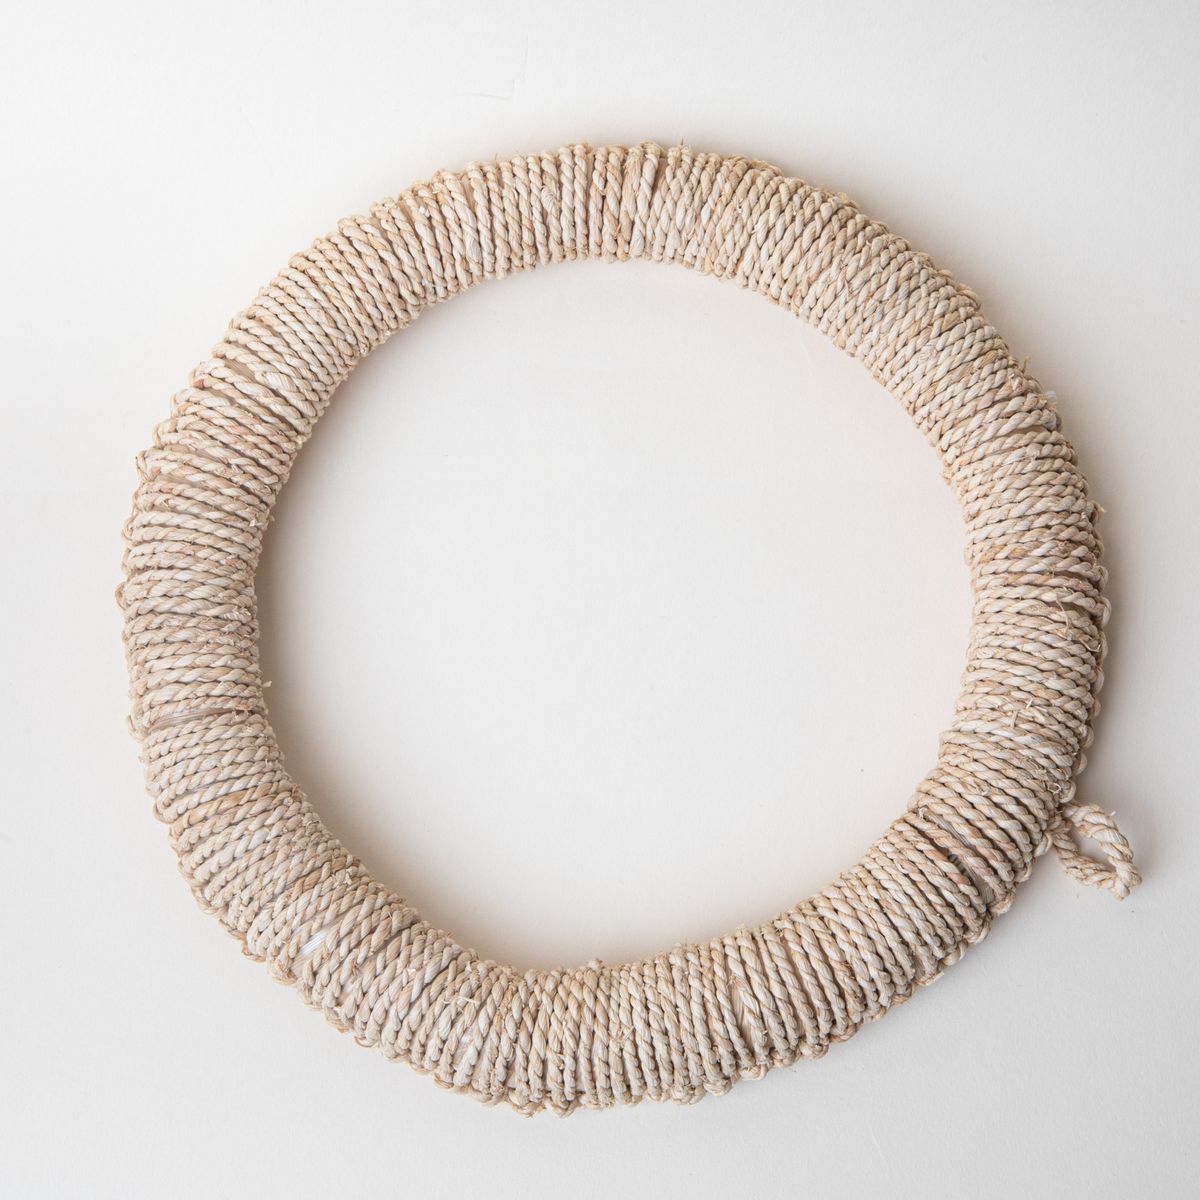 Circle ring trivet wrapped in woven organic material in a neutral color